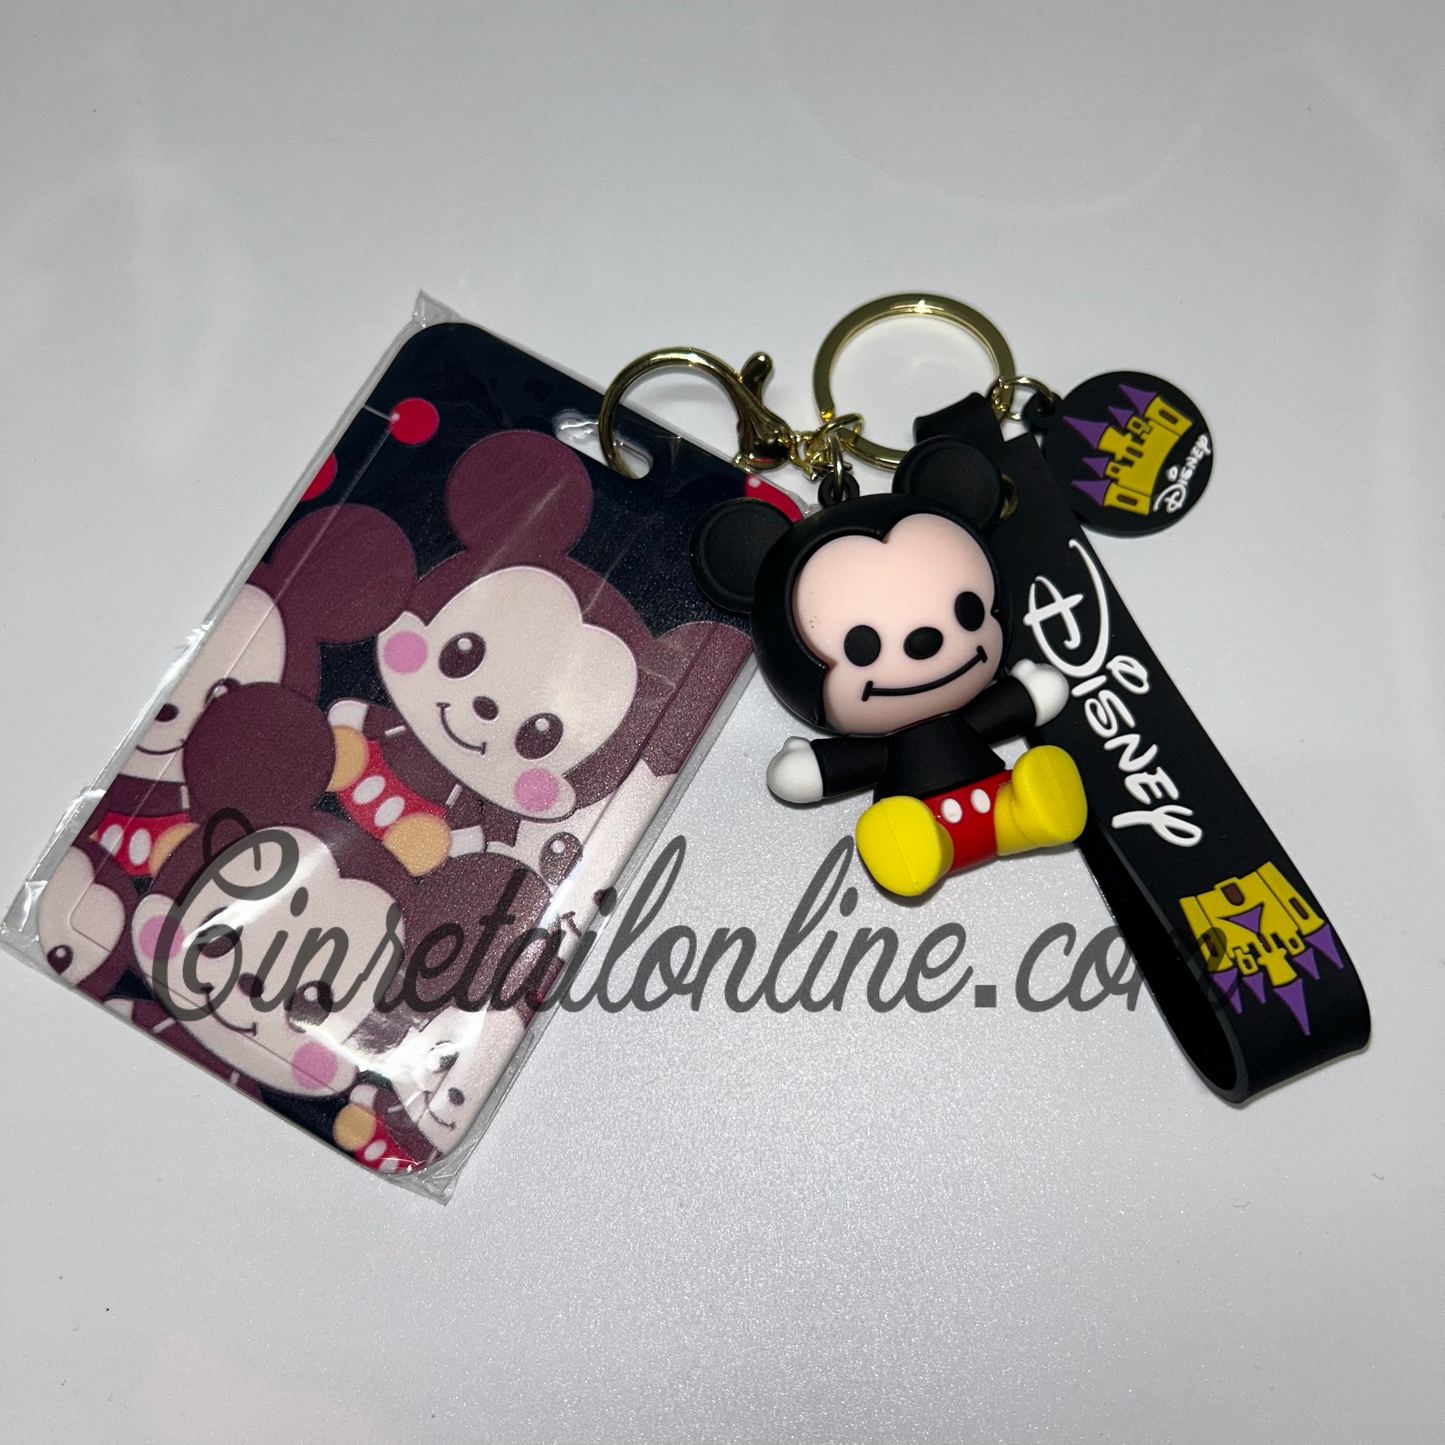 Mickey Mouse keychain